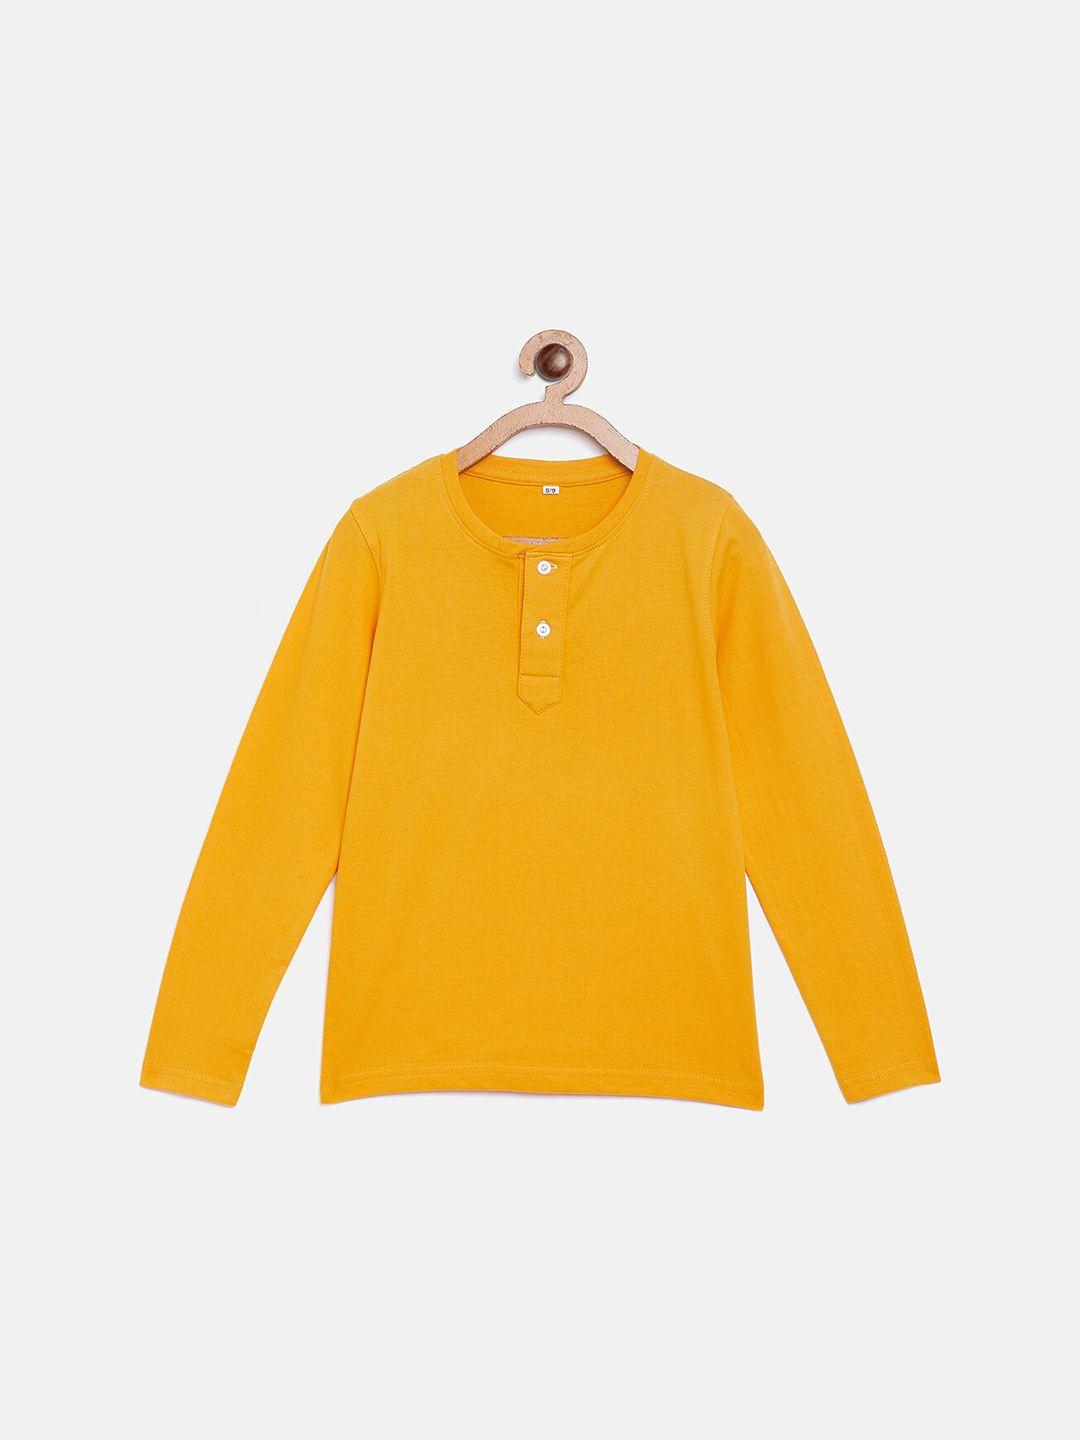 lilclan - by the dry state boys yellow henley neck cotton t-shirt